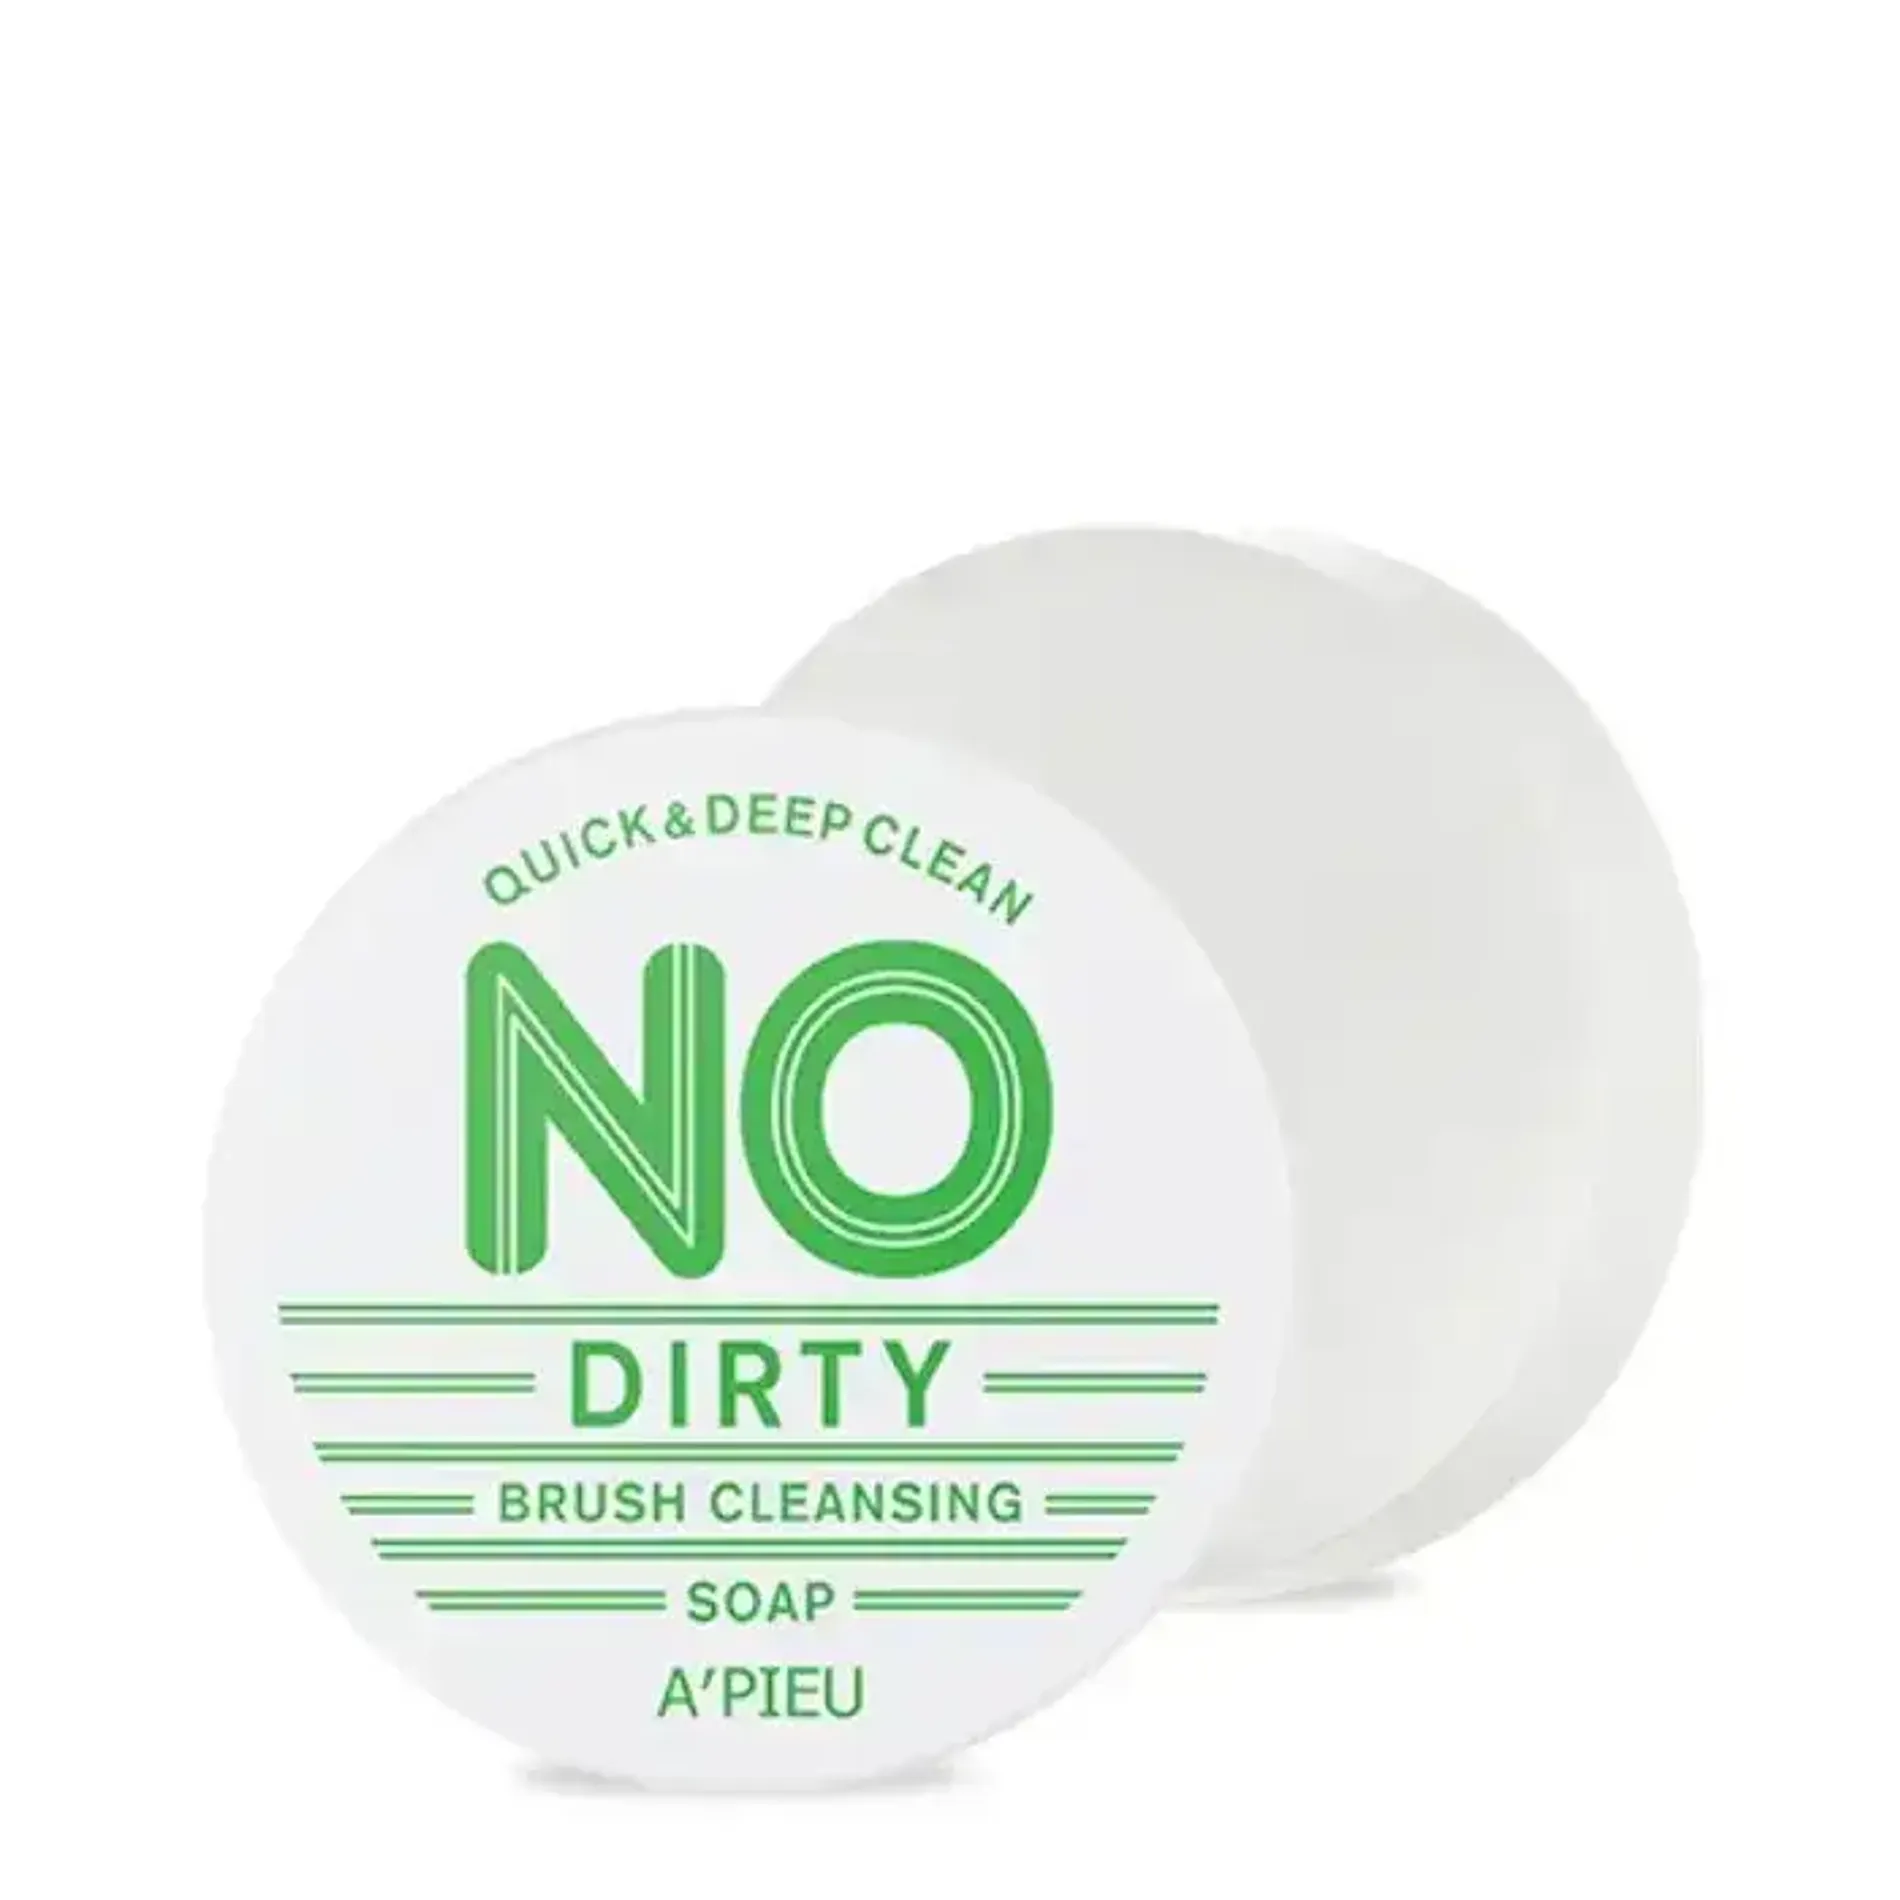 dung-cu-lam-sach-co-a-pieu-no-dirty-brush-cleansing-soap-47g-1